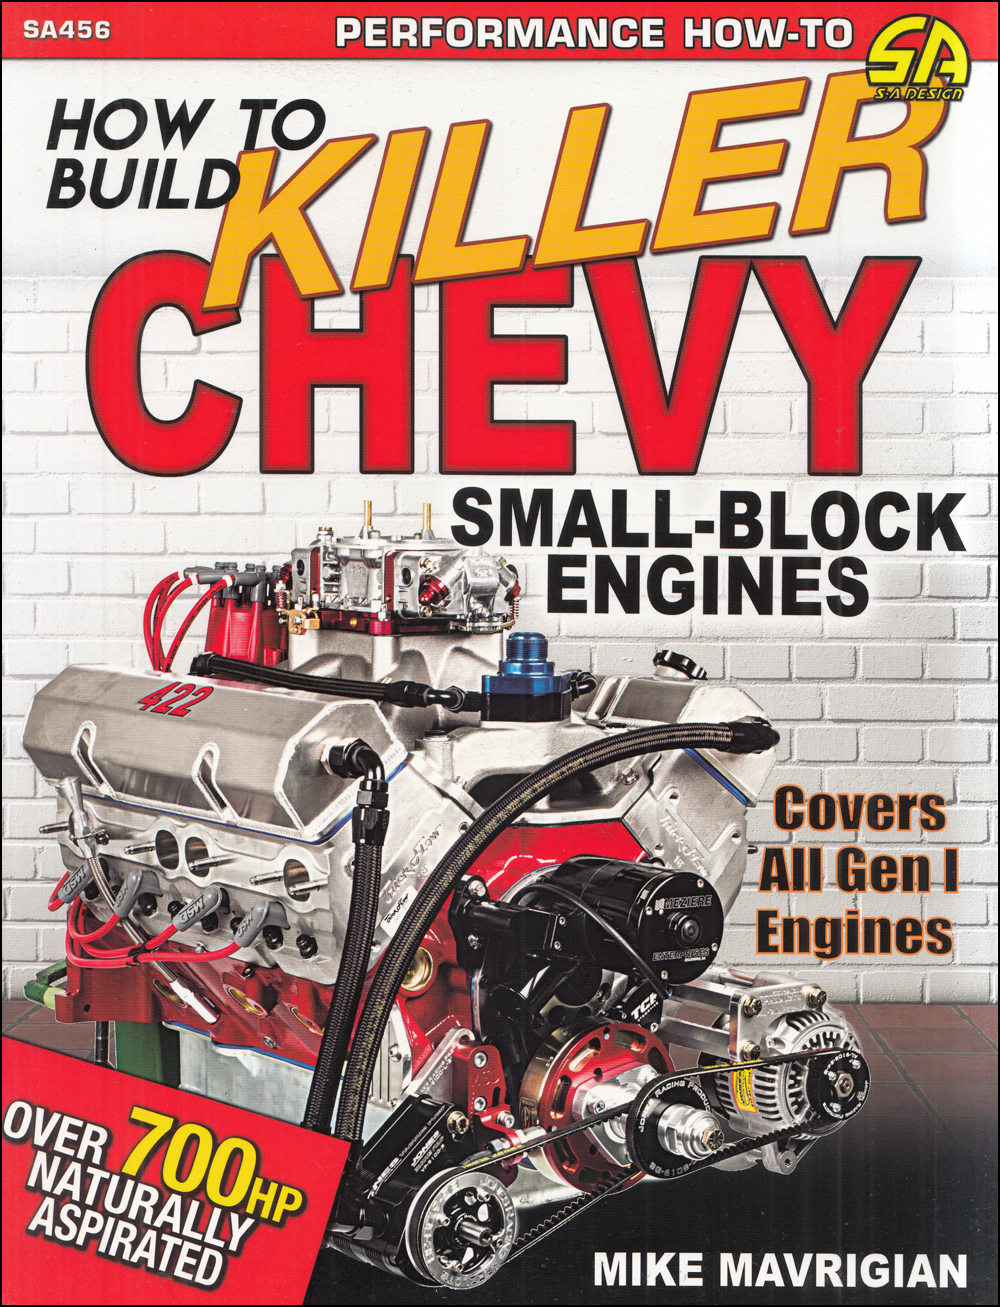 1955-1974 Performance How-To Build Killer Chevy Small-Block Engines